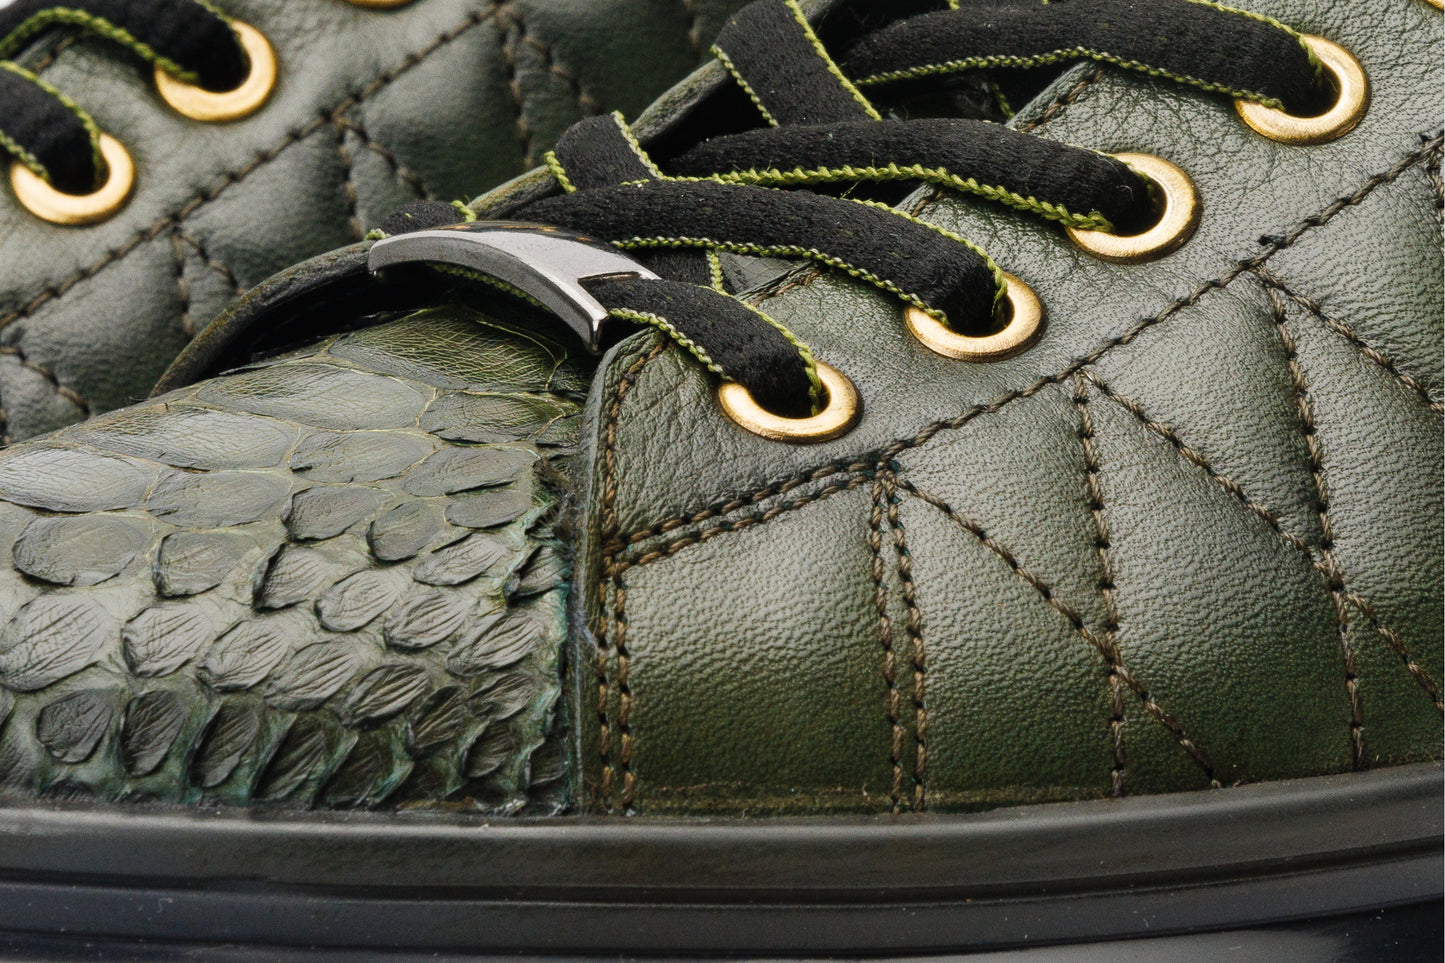 The Adler Green Snk Leather Men Sneaker Limited Edition